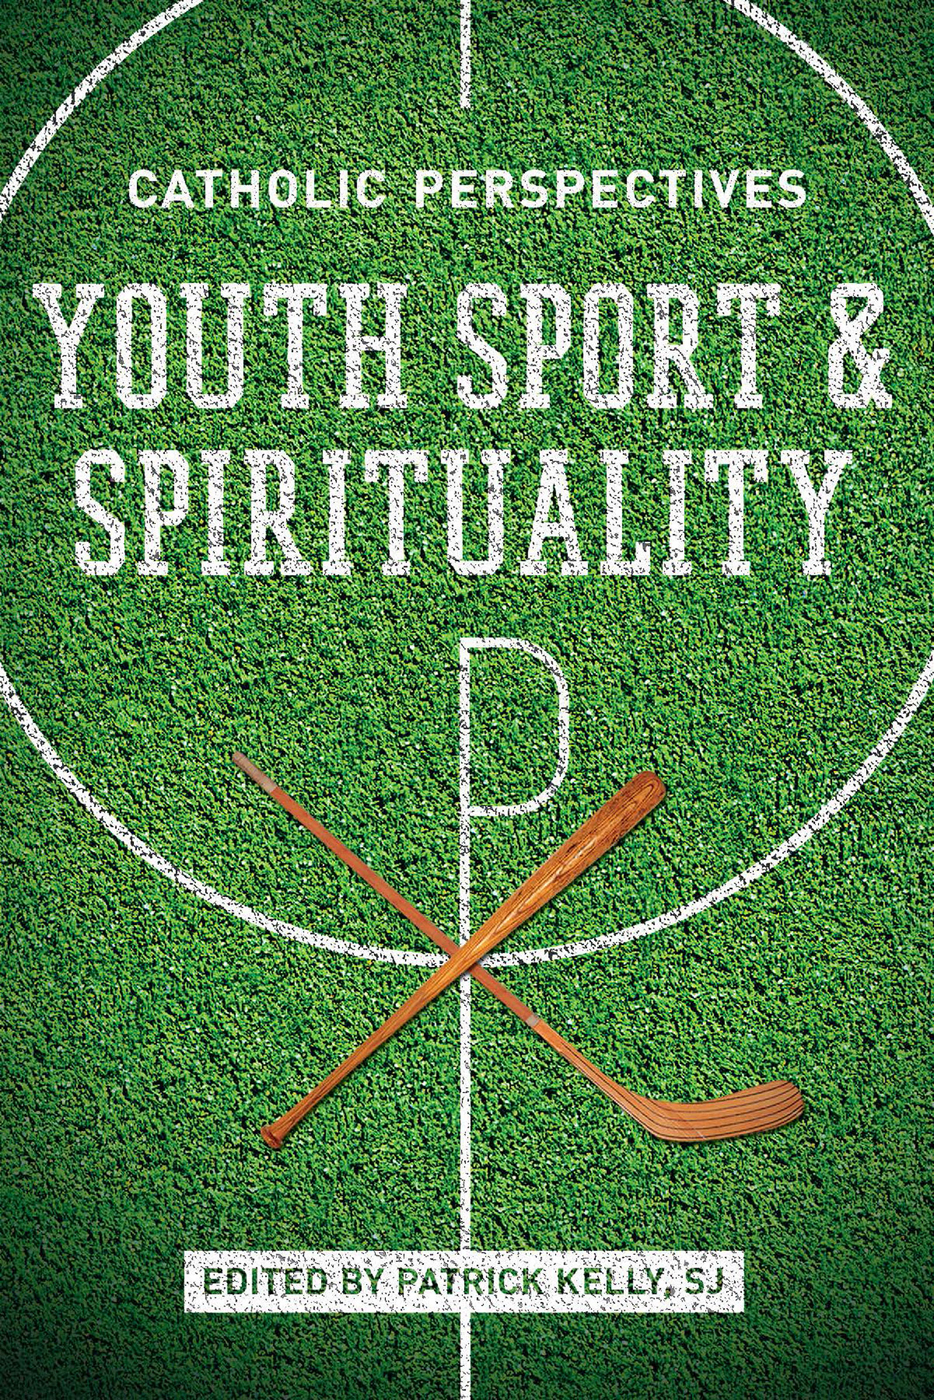 YOUTH SPORT AND SPIRITUALITY CATHOLIC PERSPECTIVES edited by PATRICK - photo 1